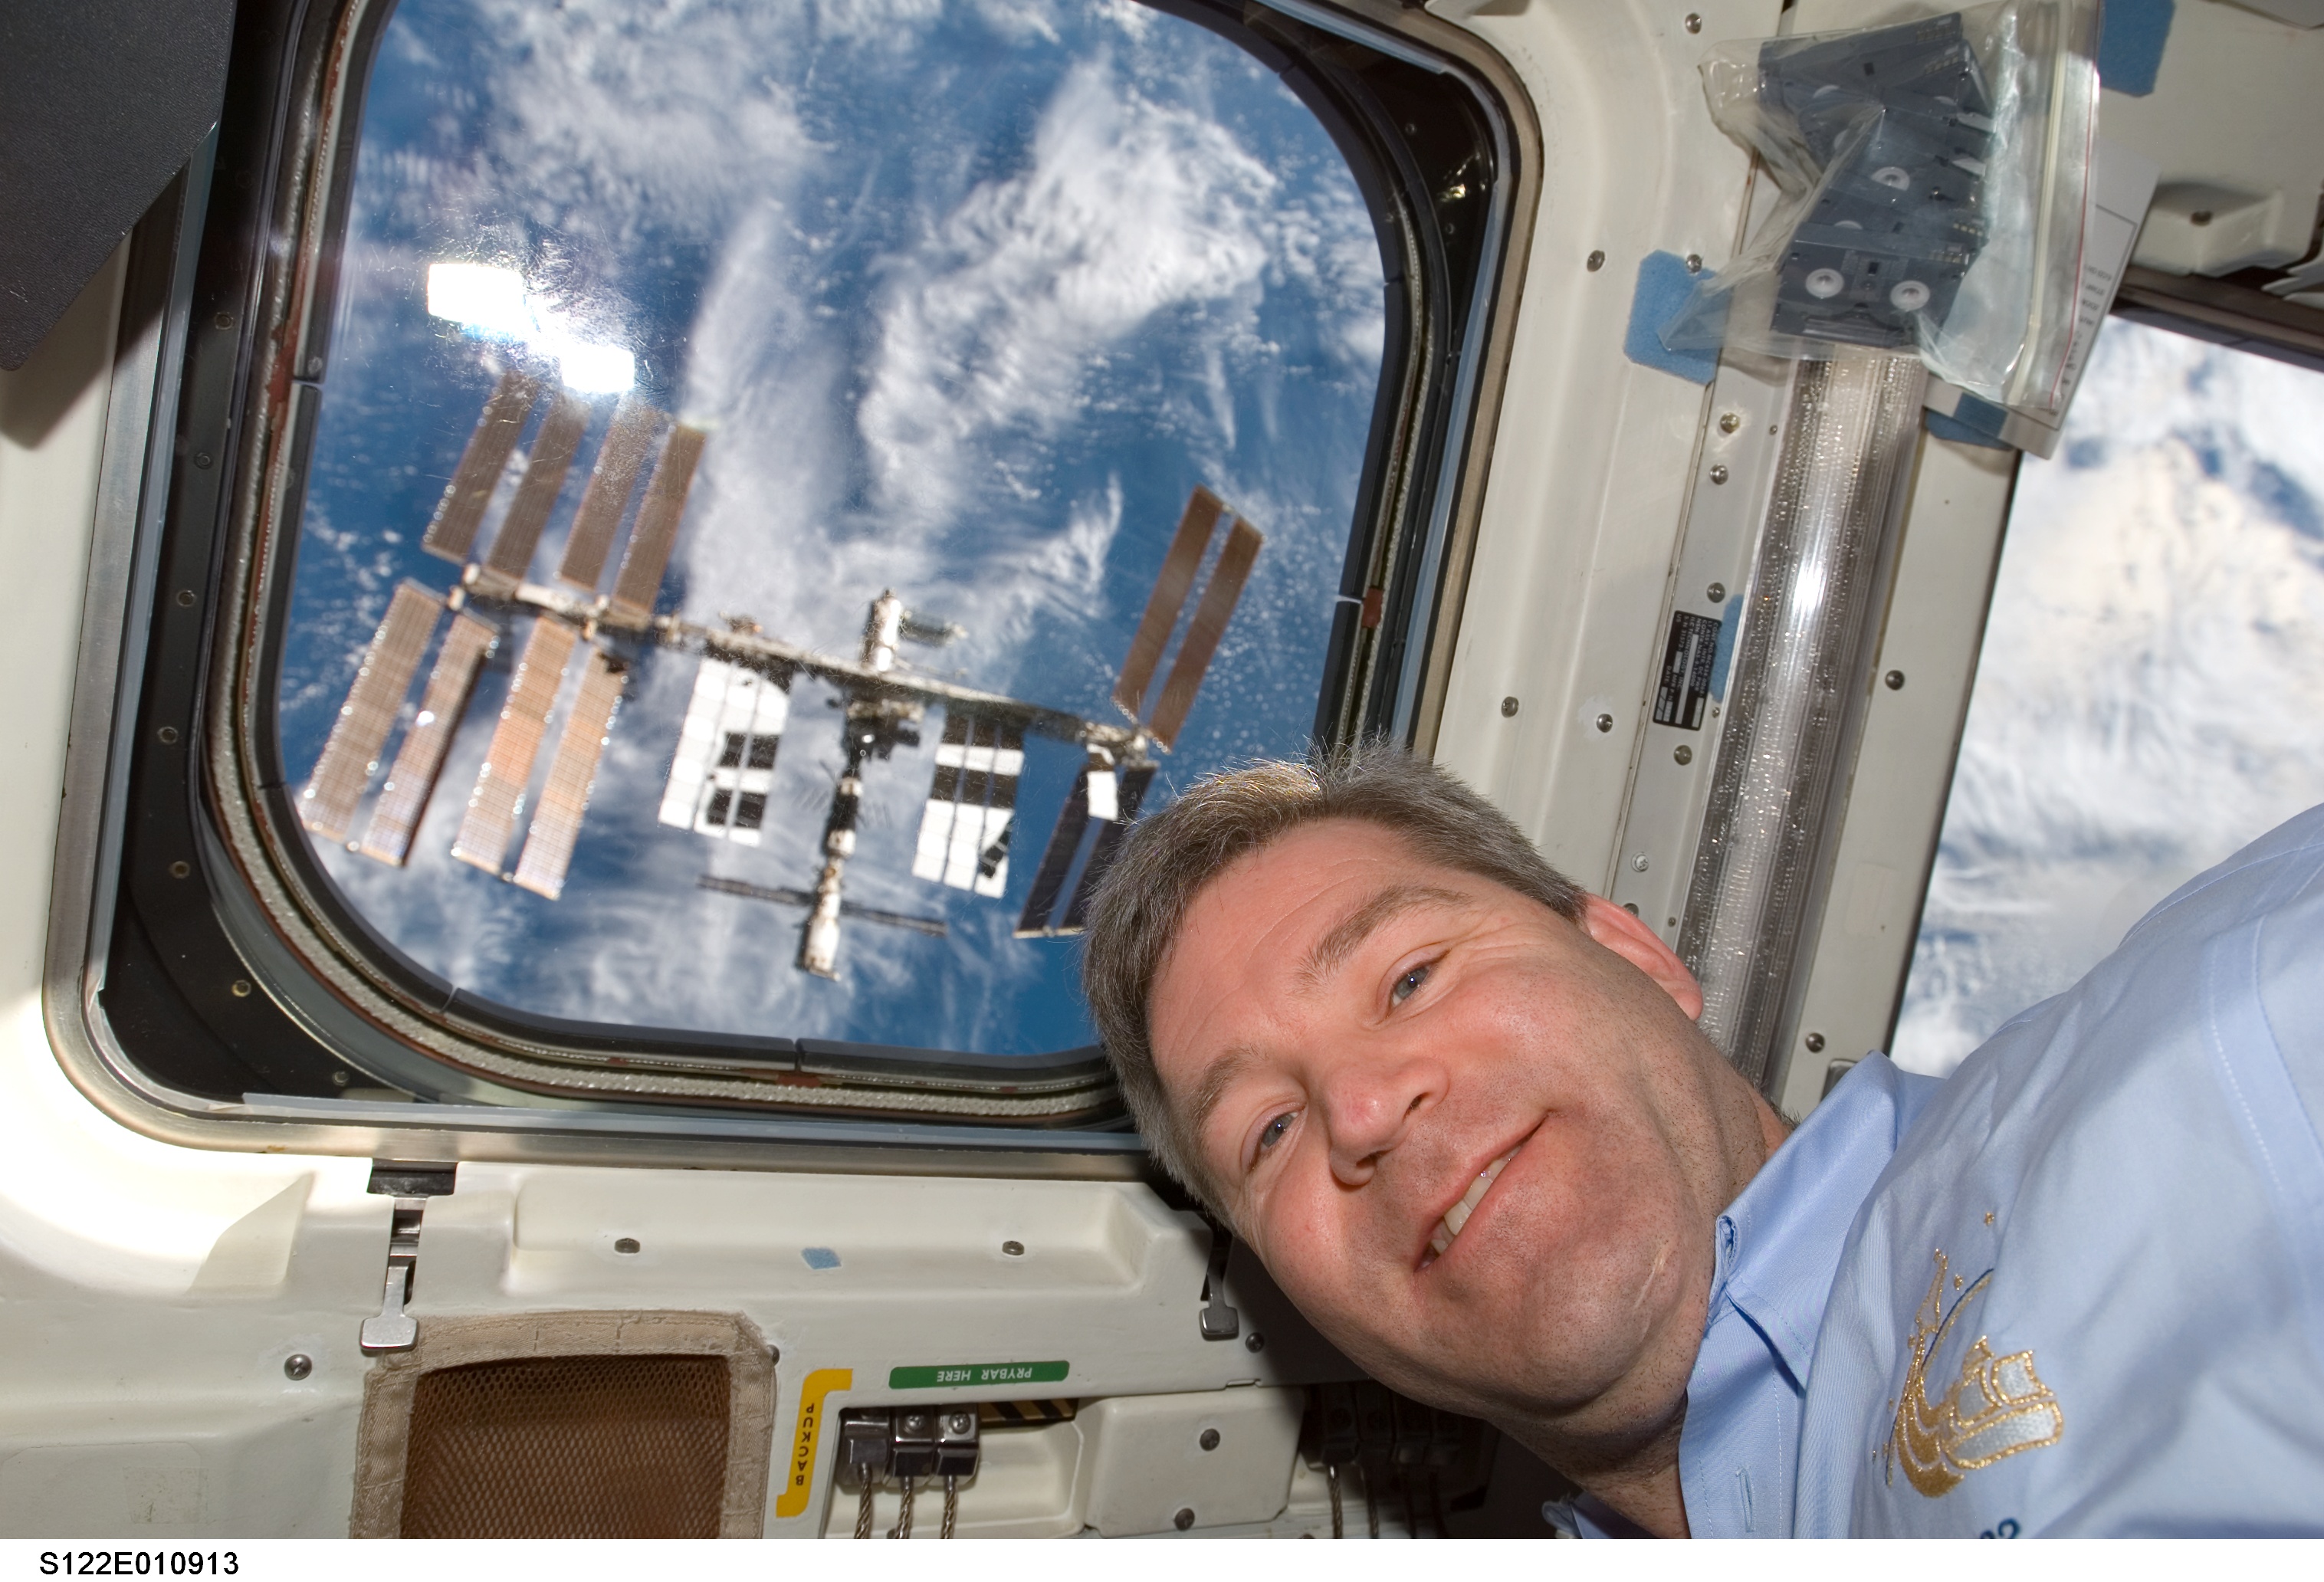 Steve Frick, who commanded STS-122, the shuttle mission which installed Europe's Columbus laboratory module onto the International Space Station (ISS). Photo Credit: NASA